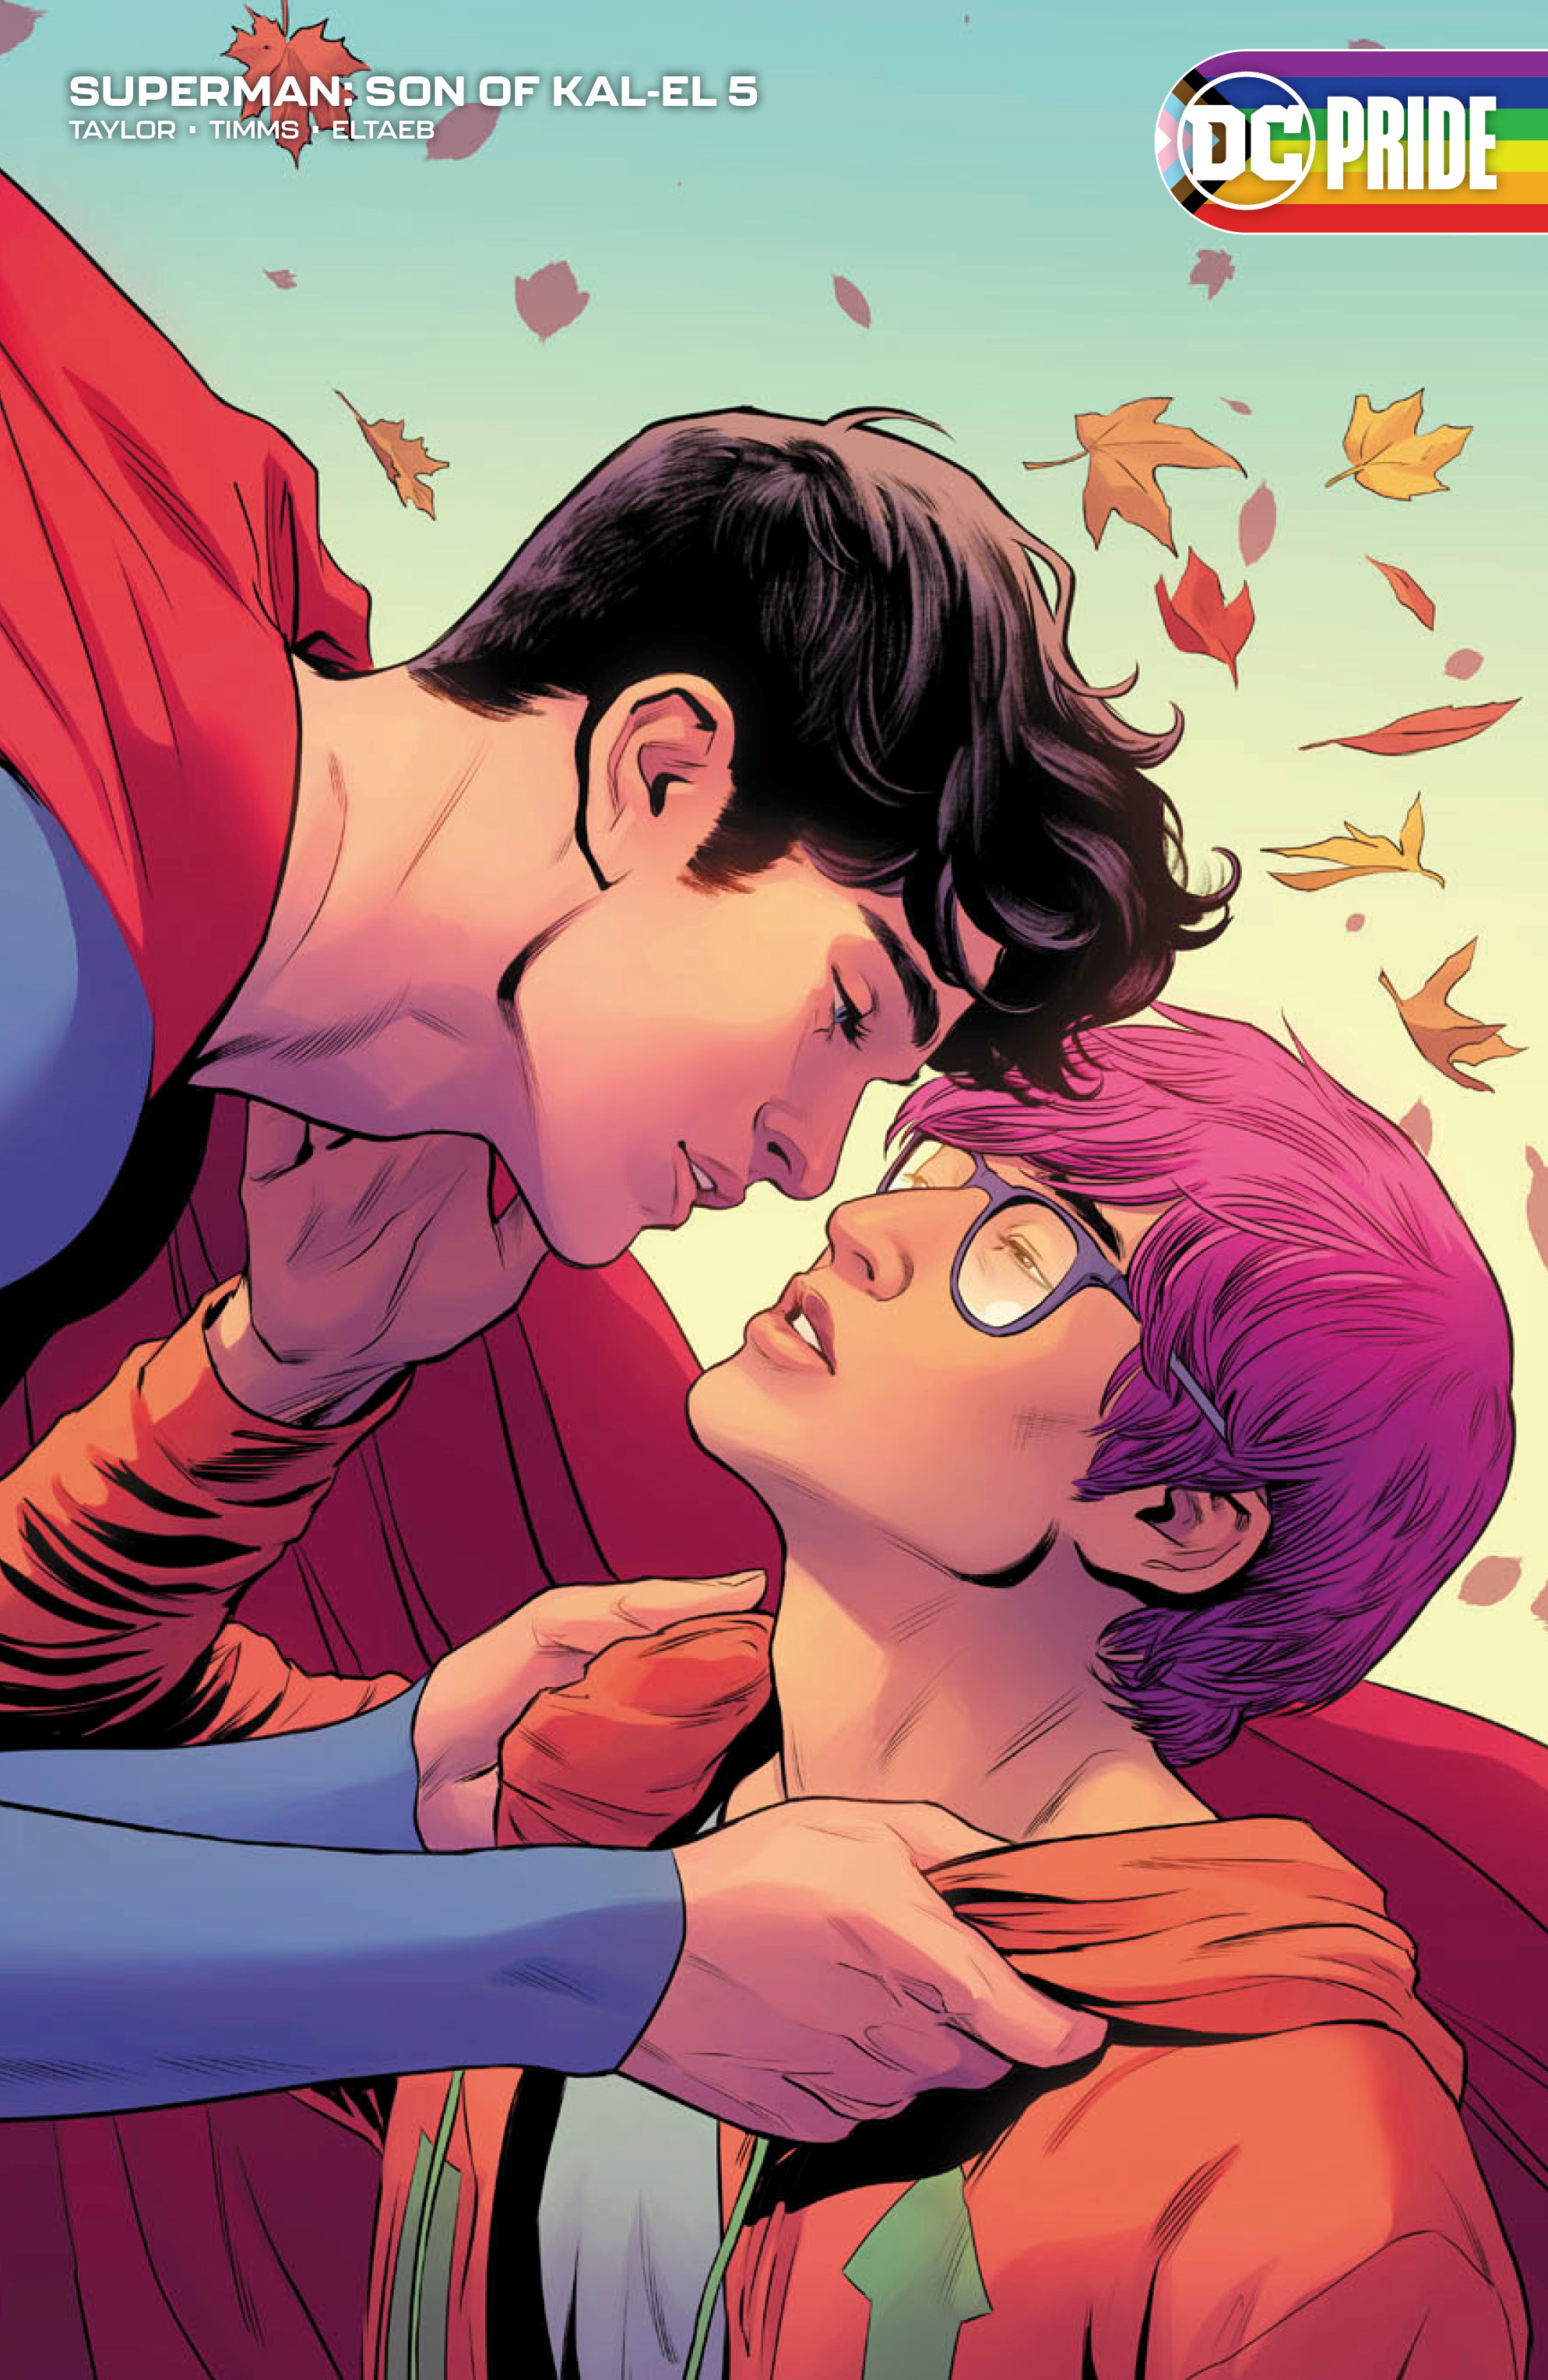 An illustration shows Superman, aka Jon Kent, about to kiss reporter Jay Nakamura in the comic book 'Superman: Son of Kal-El'